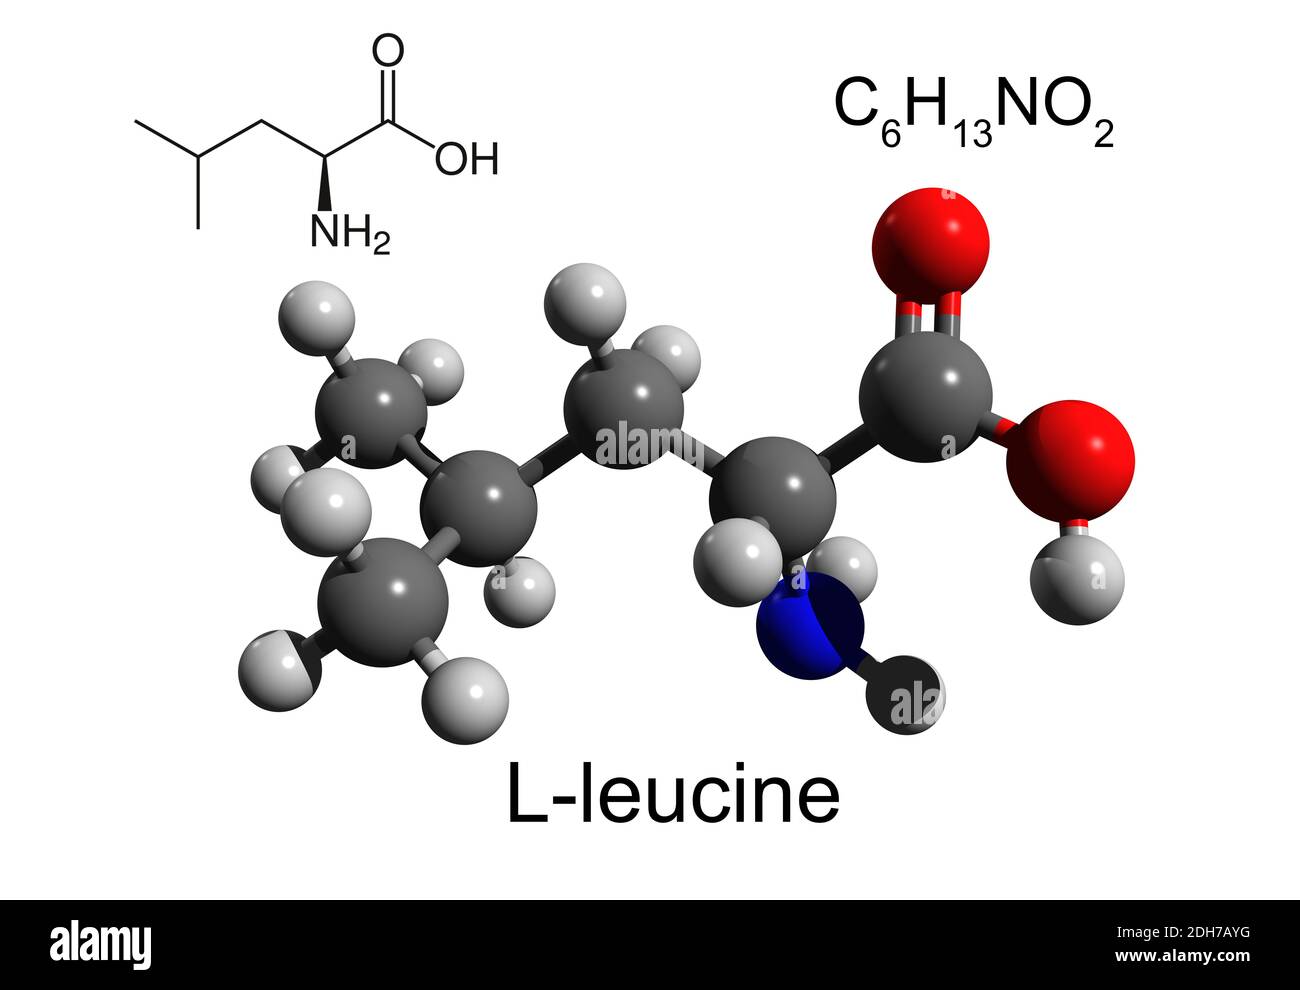 Chemical formula, structural formula and 3D ball-and-stick model of L-leucine, an essential amino acid, white background Stock Photo